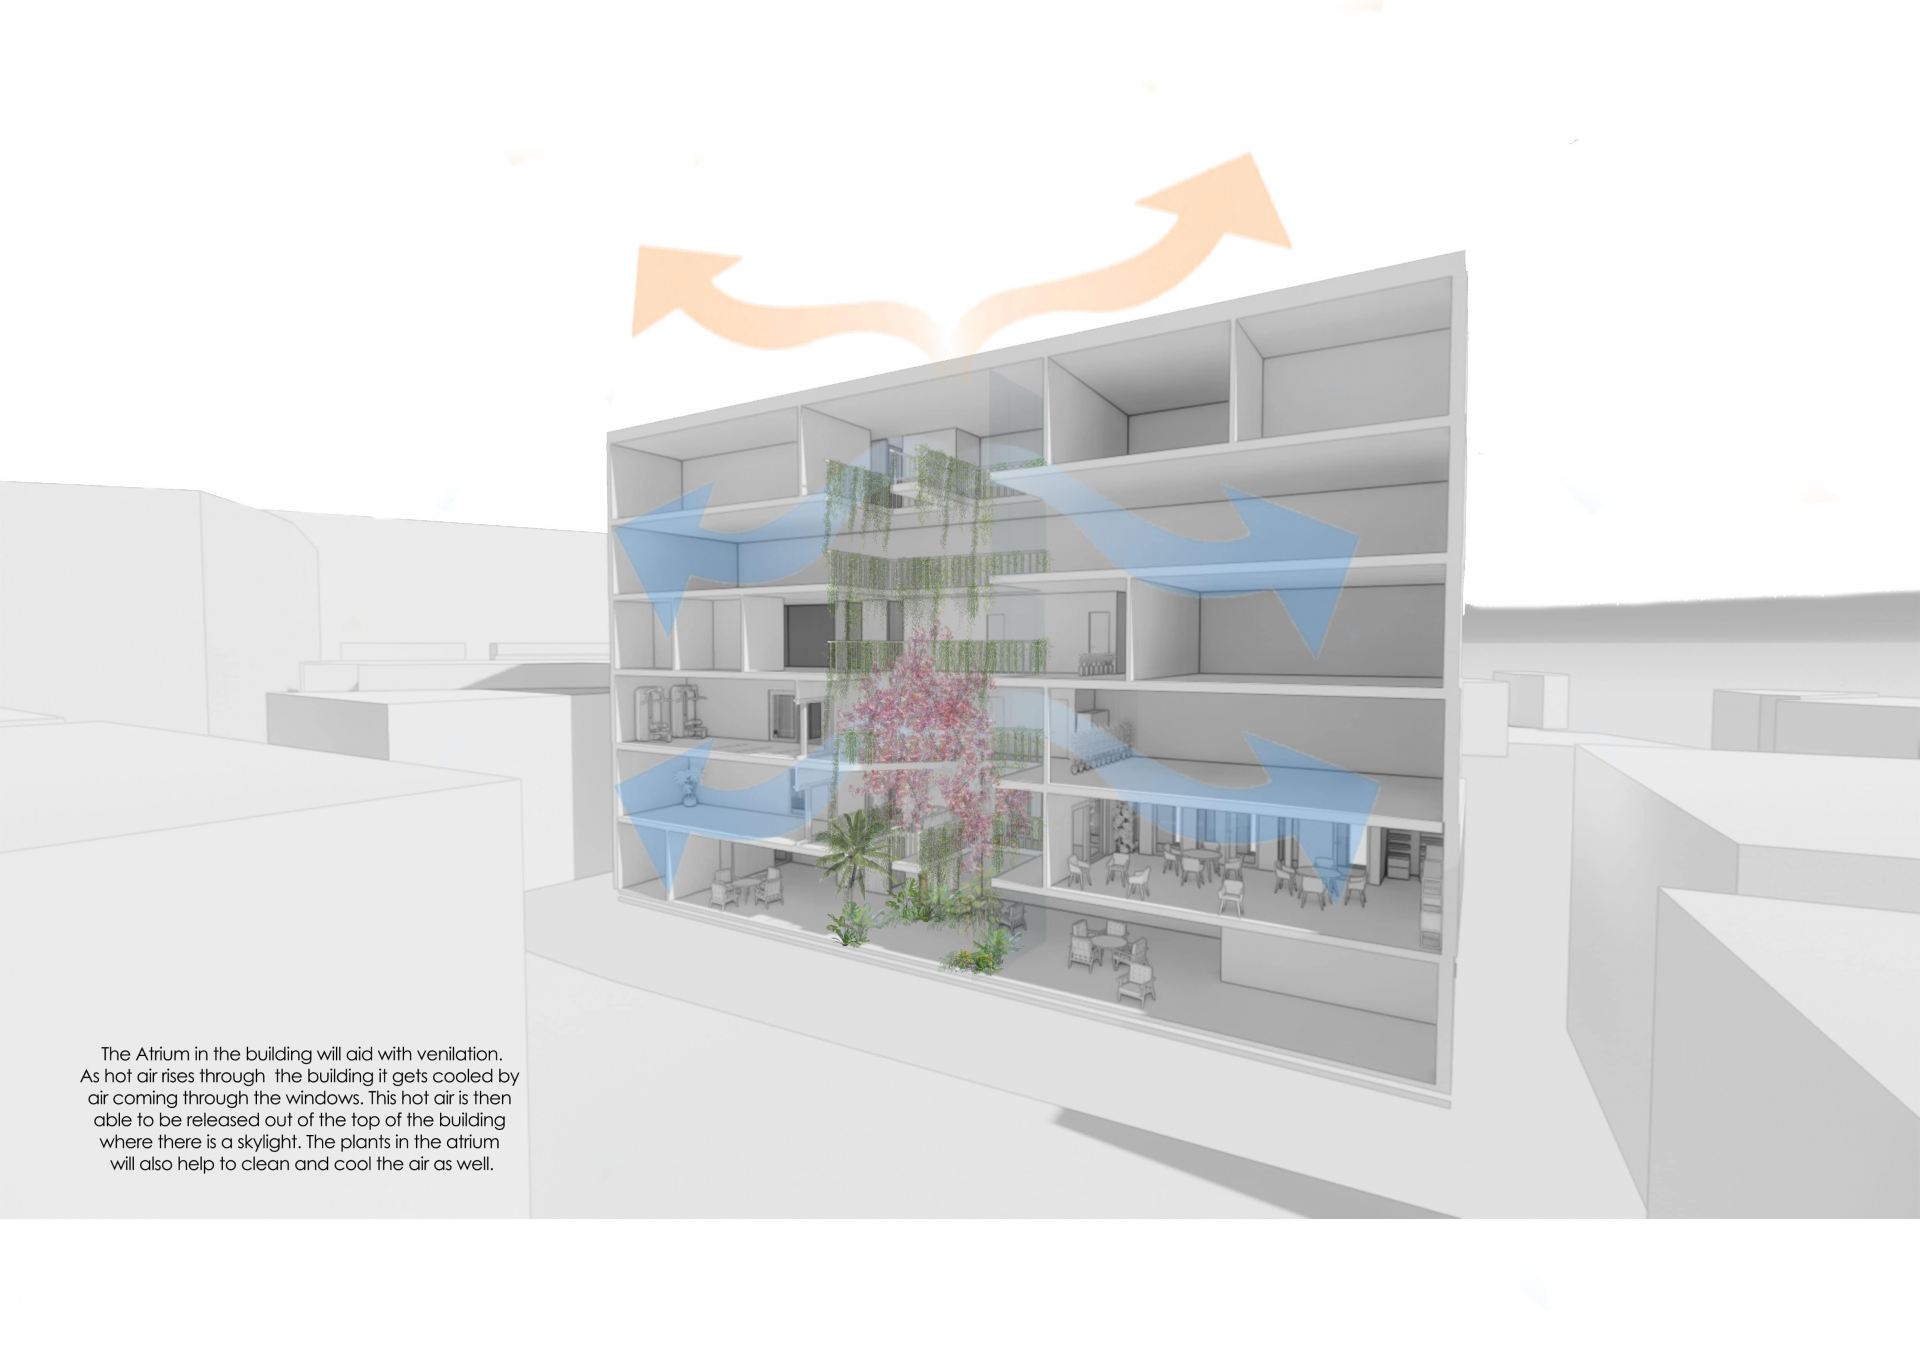 A three dimensional section cut through the building showing how the atrium space works.